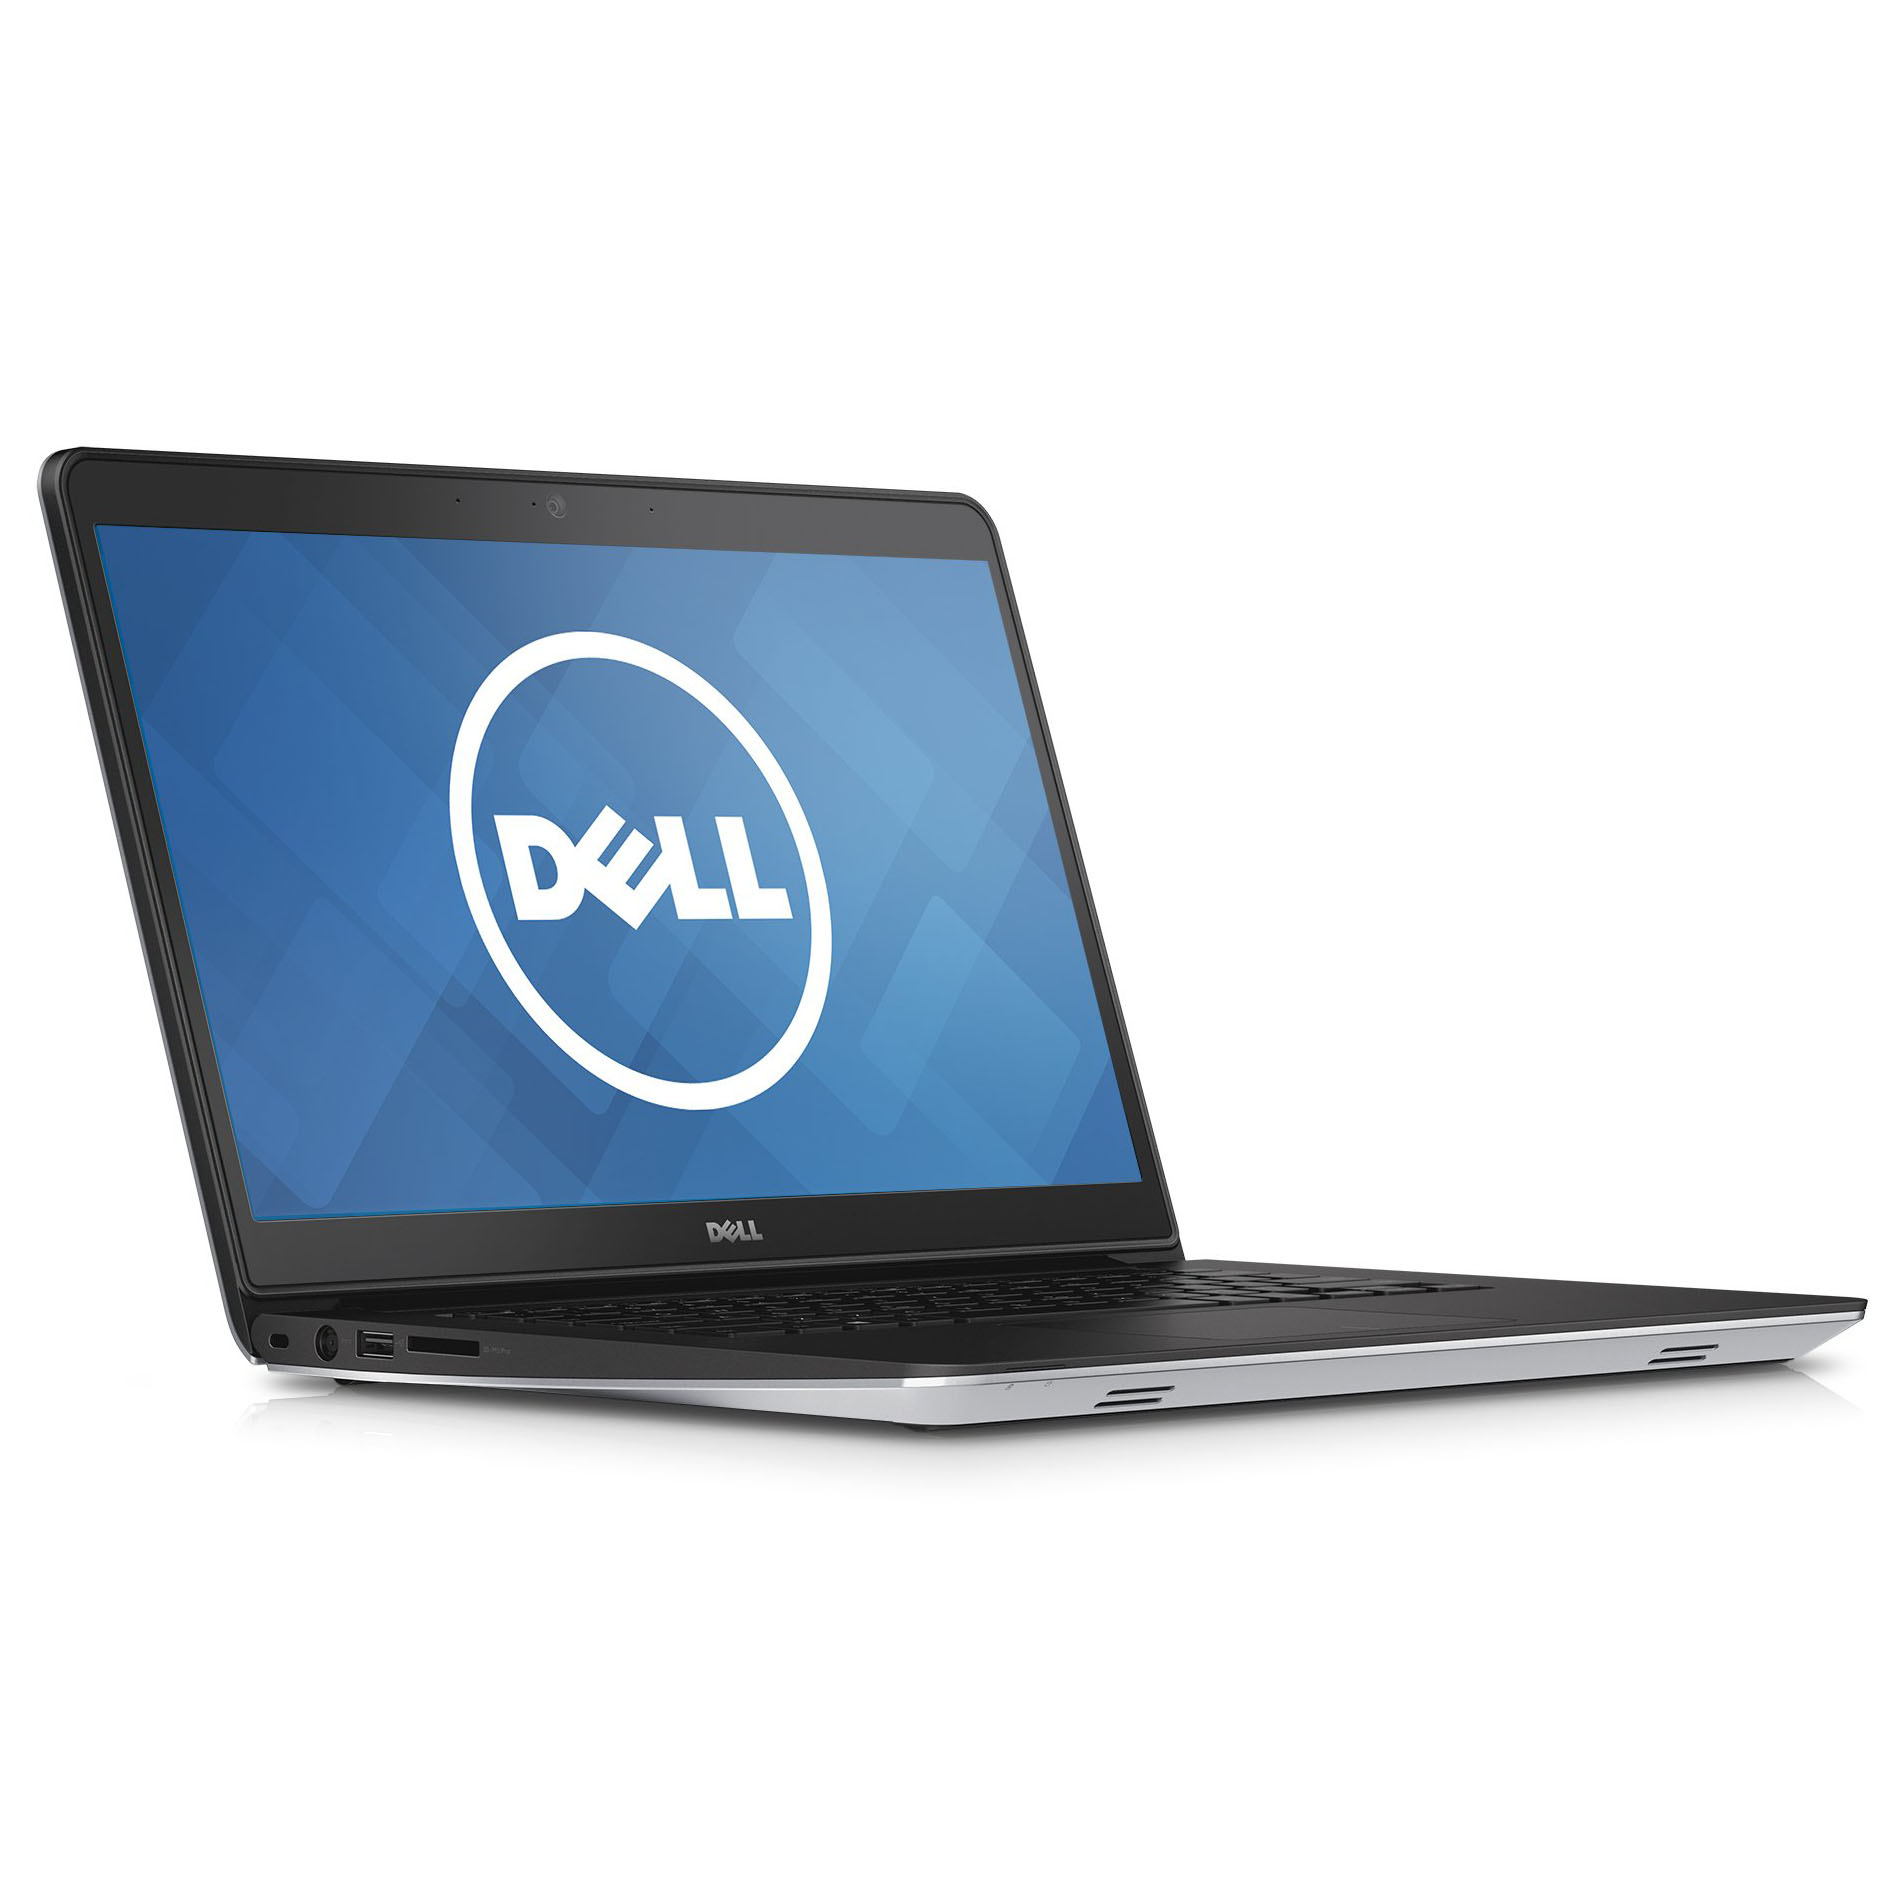 Dell Inspiron 14 5451 Notebook